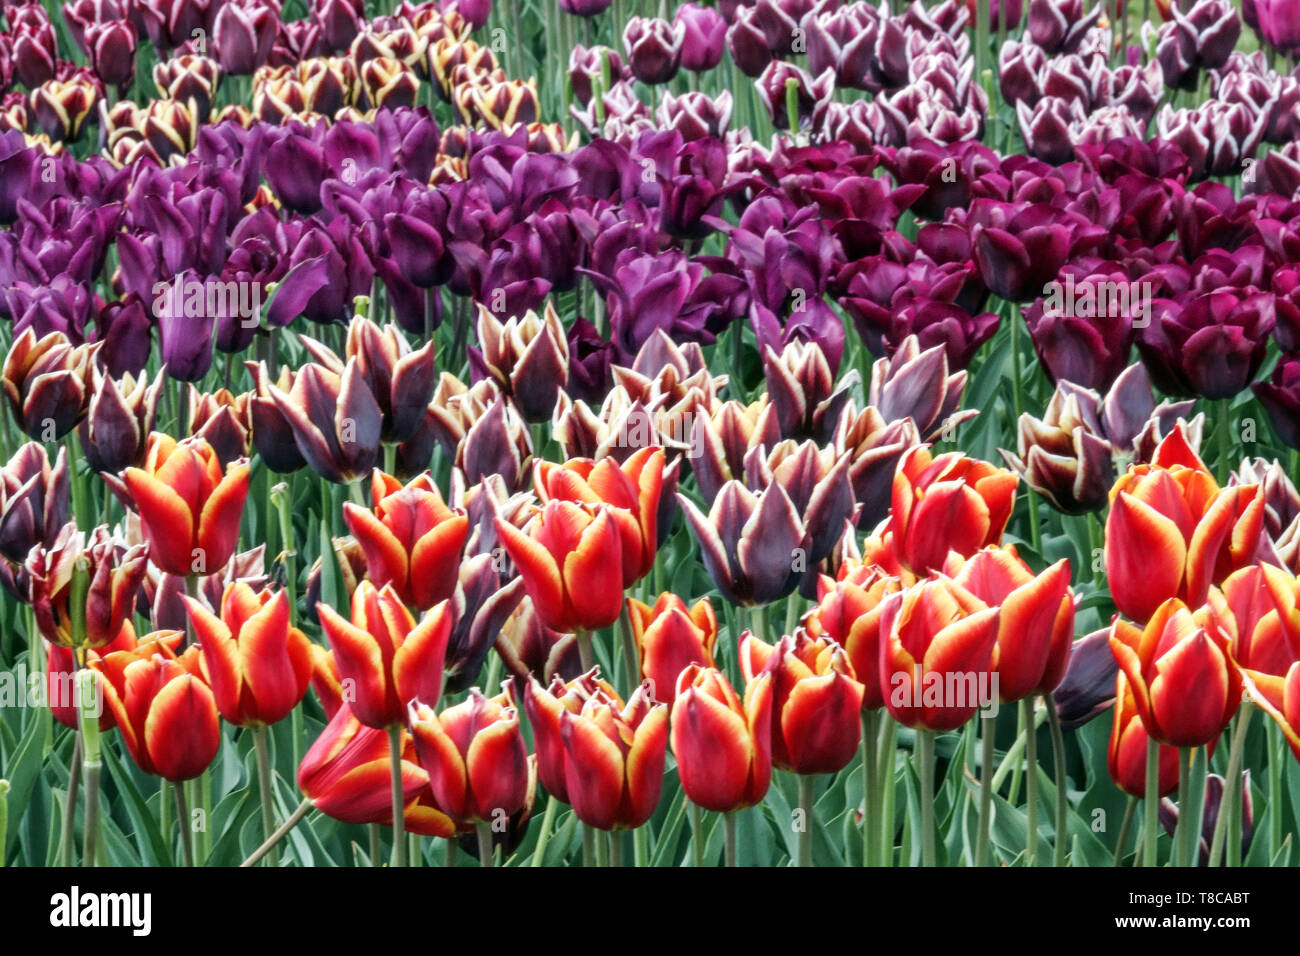 Colorful flower bed garden, mixed tulips Stock Photo